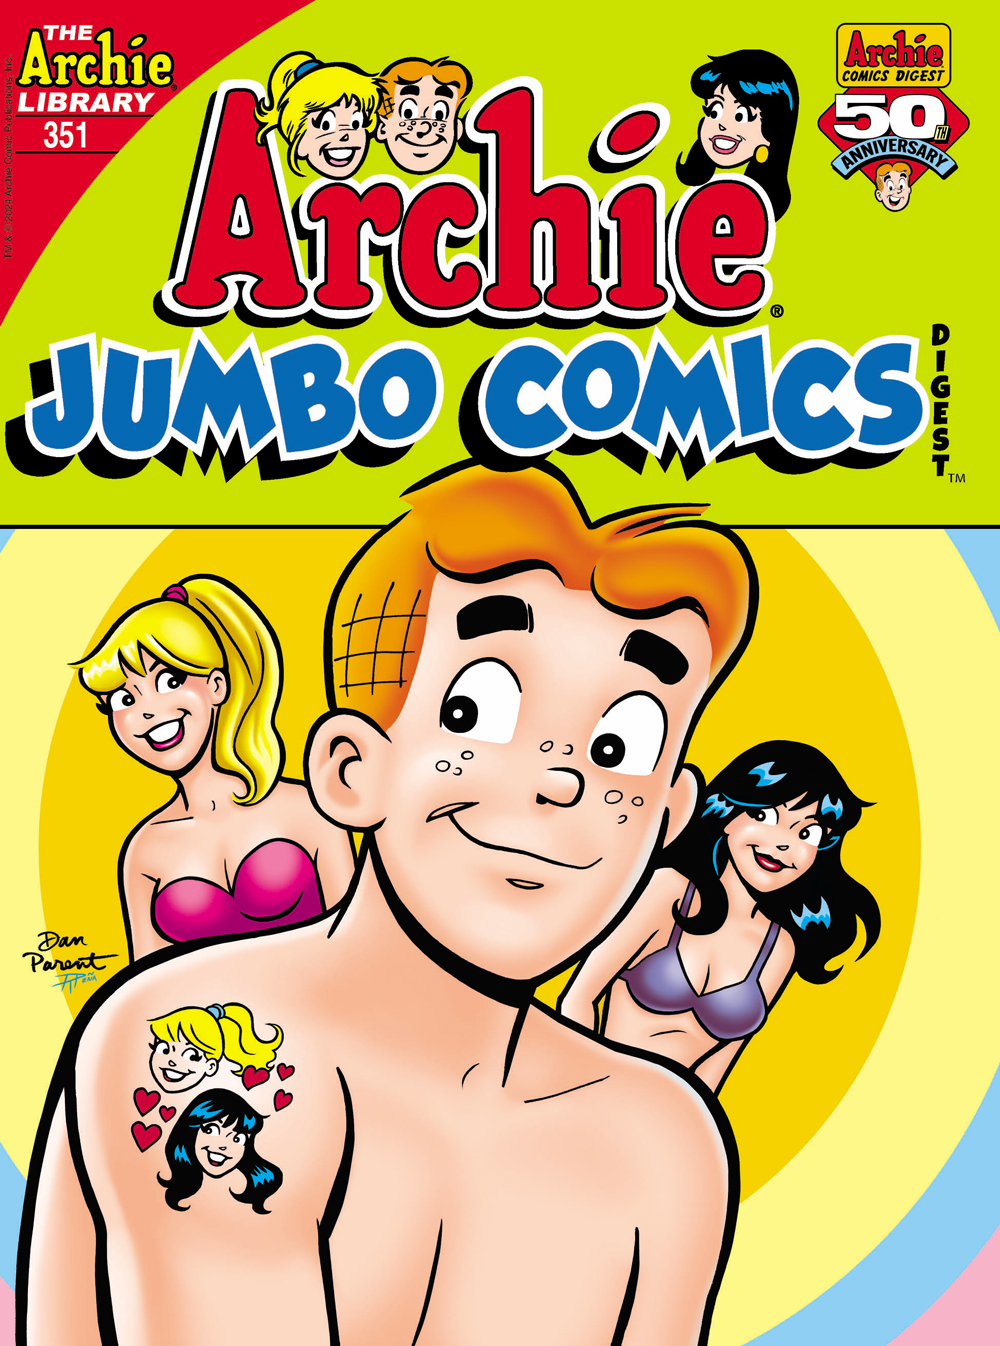 Archie looks out at the reader smiling. His shirt is off and he has a temporary tattoo on his arm of Betty and Veronica with hearts floating around them. Betty and Veronica stand behind him, smiling, wearing swimsuits.